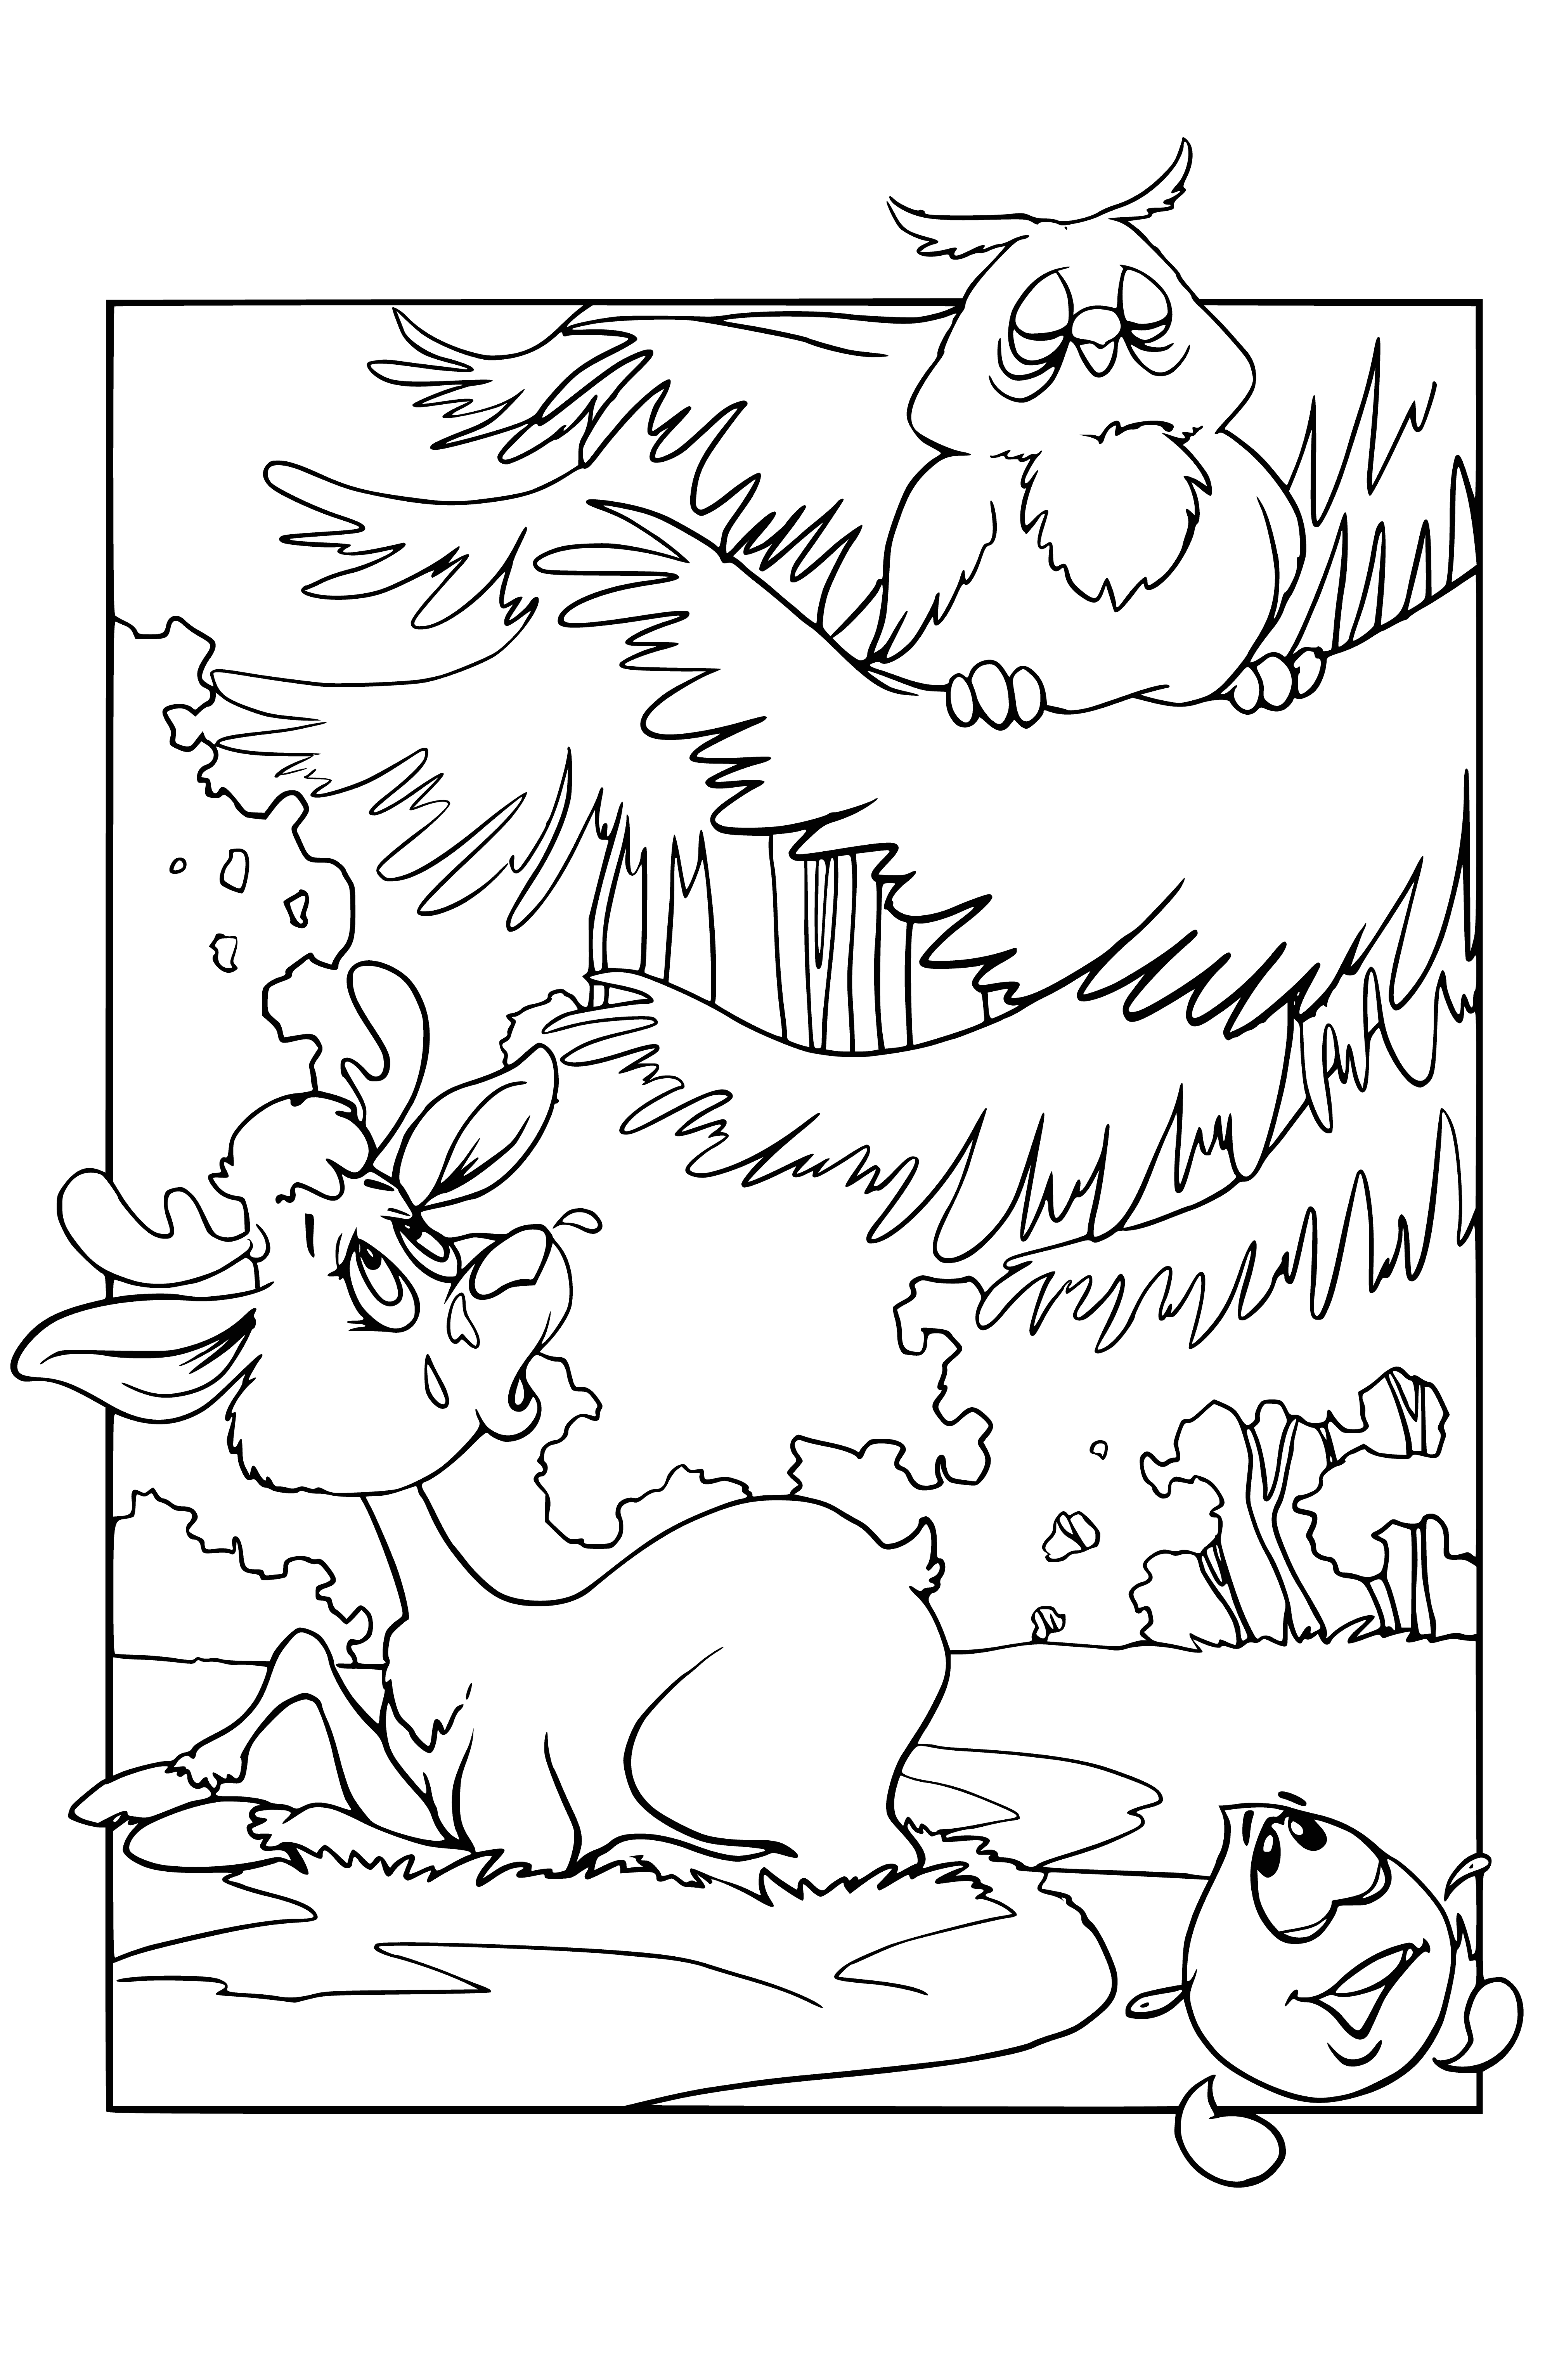 coloring page: Oreshenka has a giant blue droplet friend and other smaller blue & white droplets that float around her.